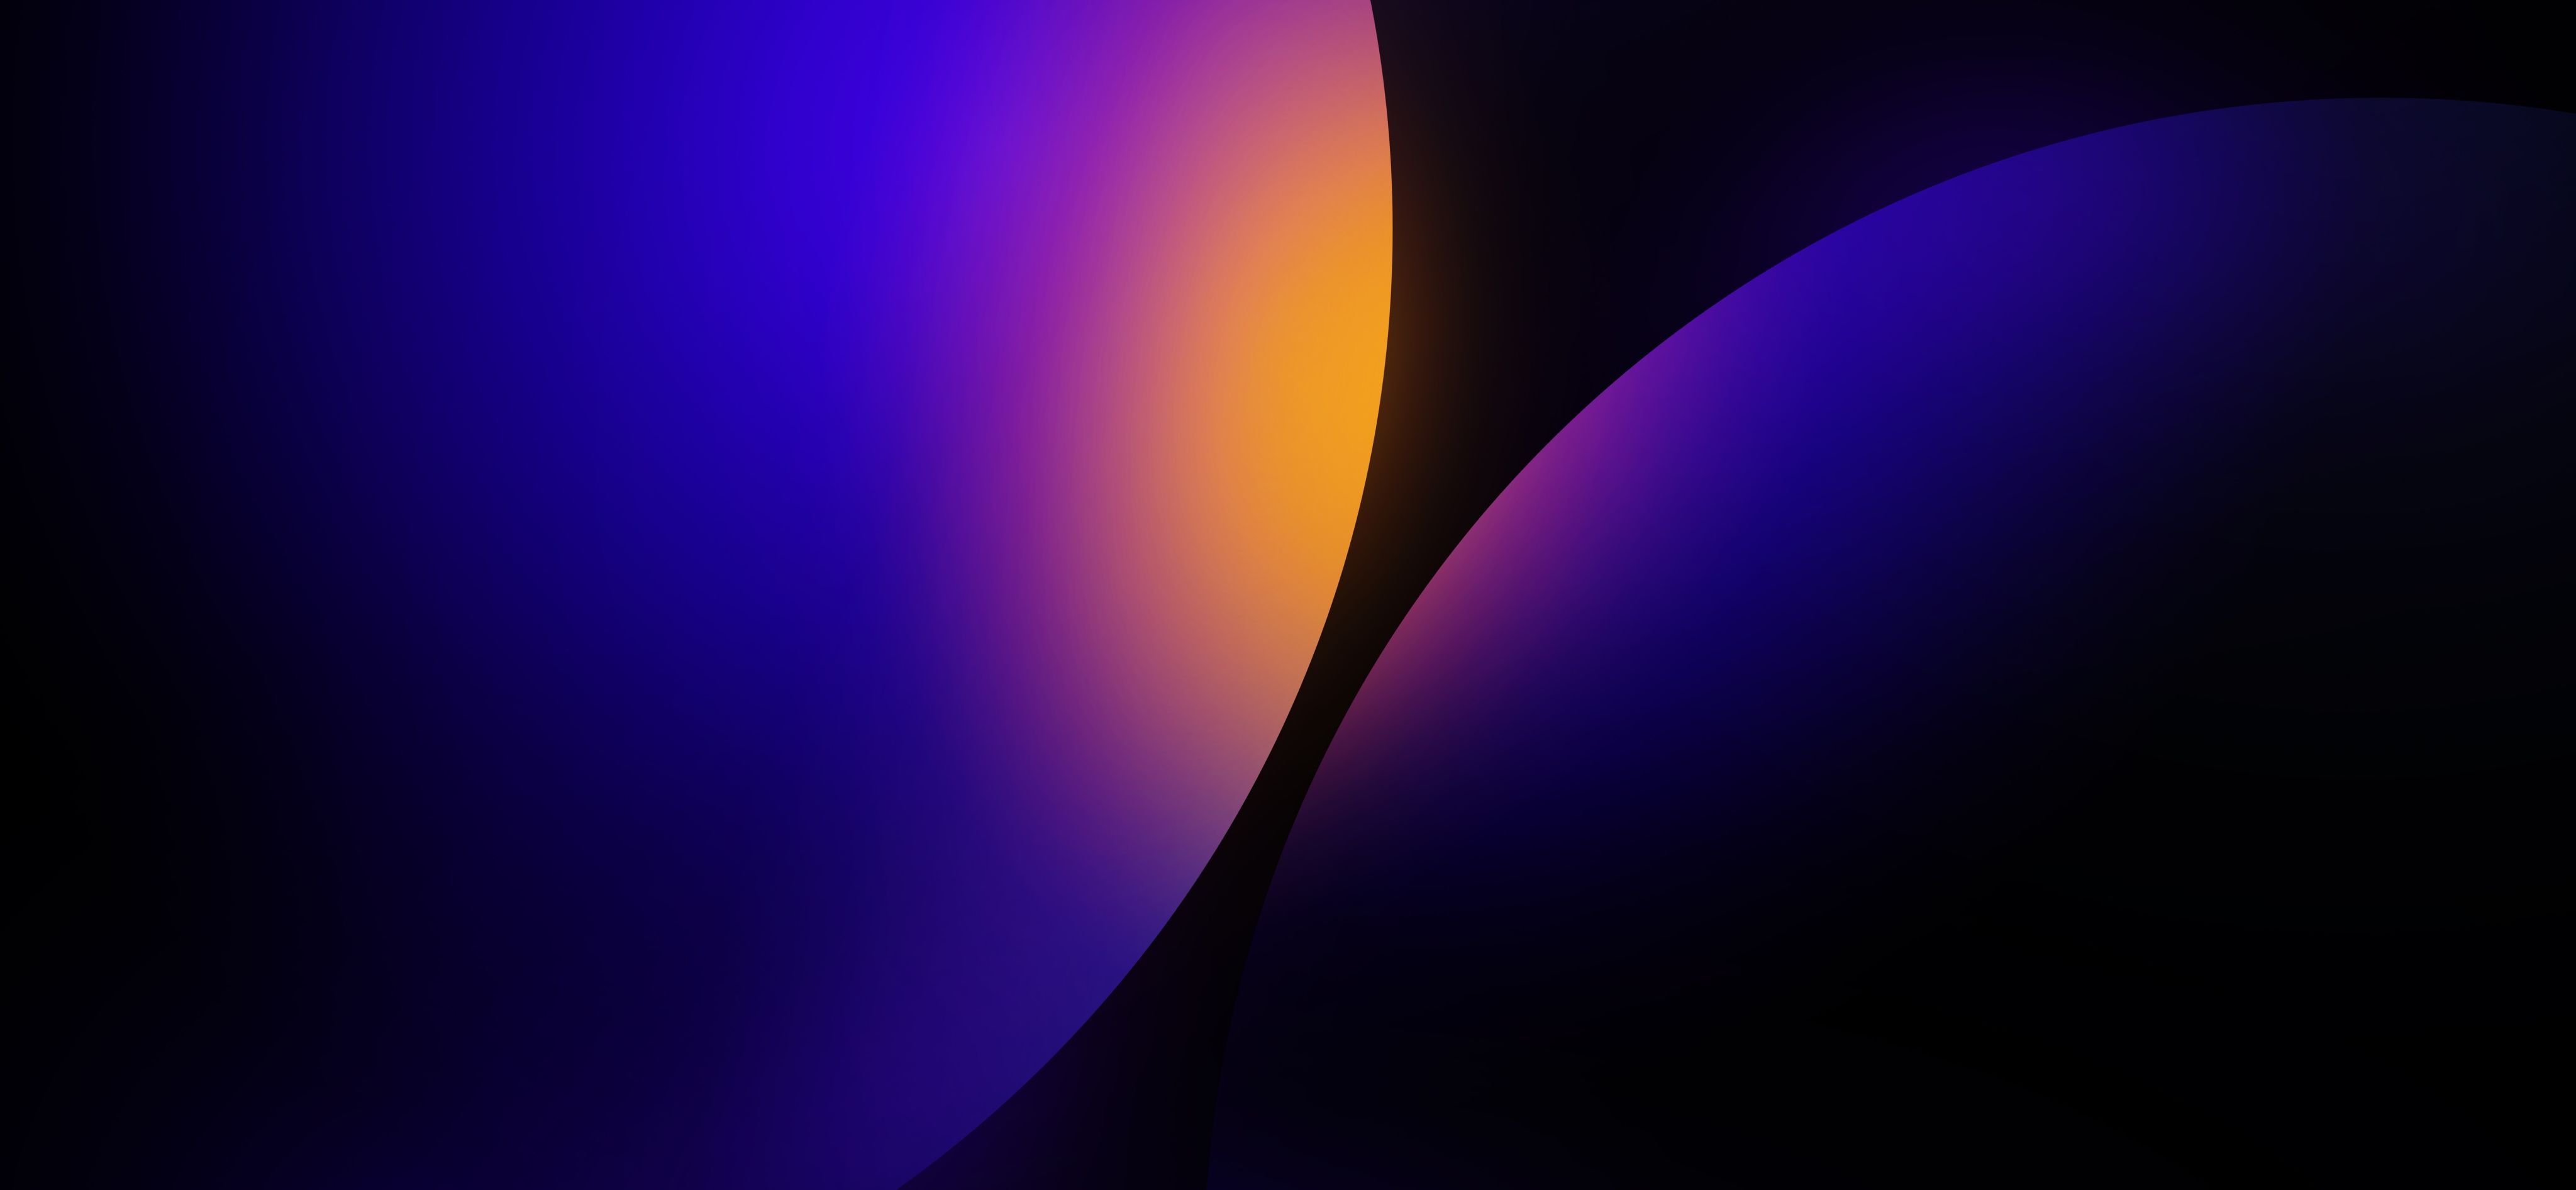 Two digital art circles showing a gradient from purple to orange.